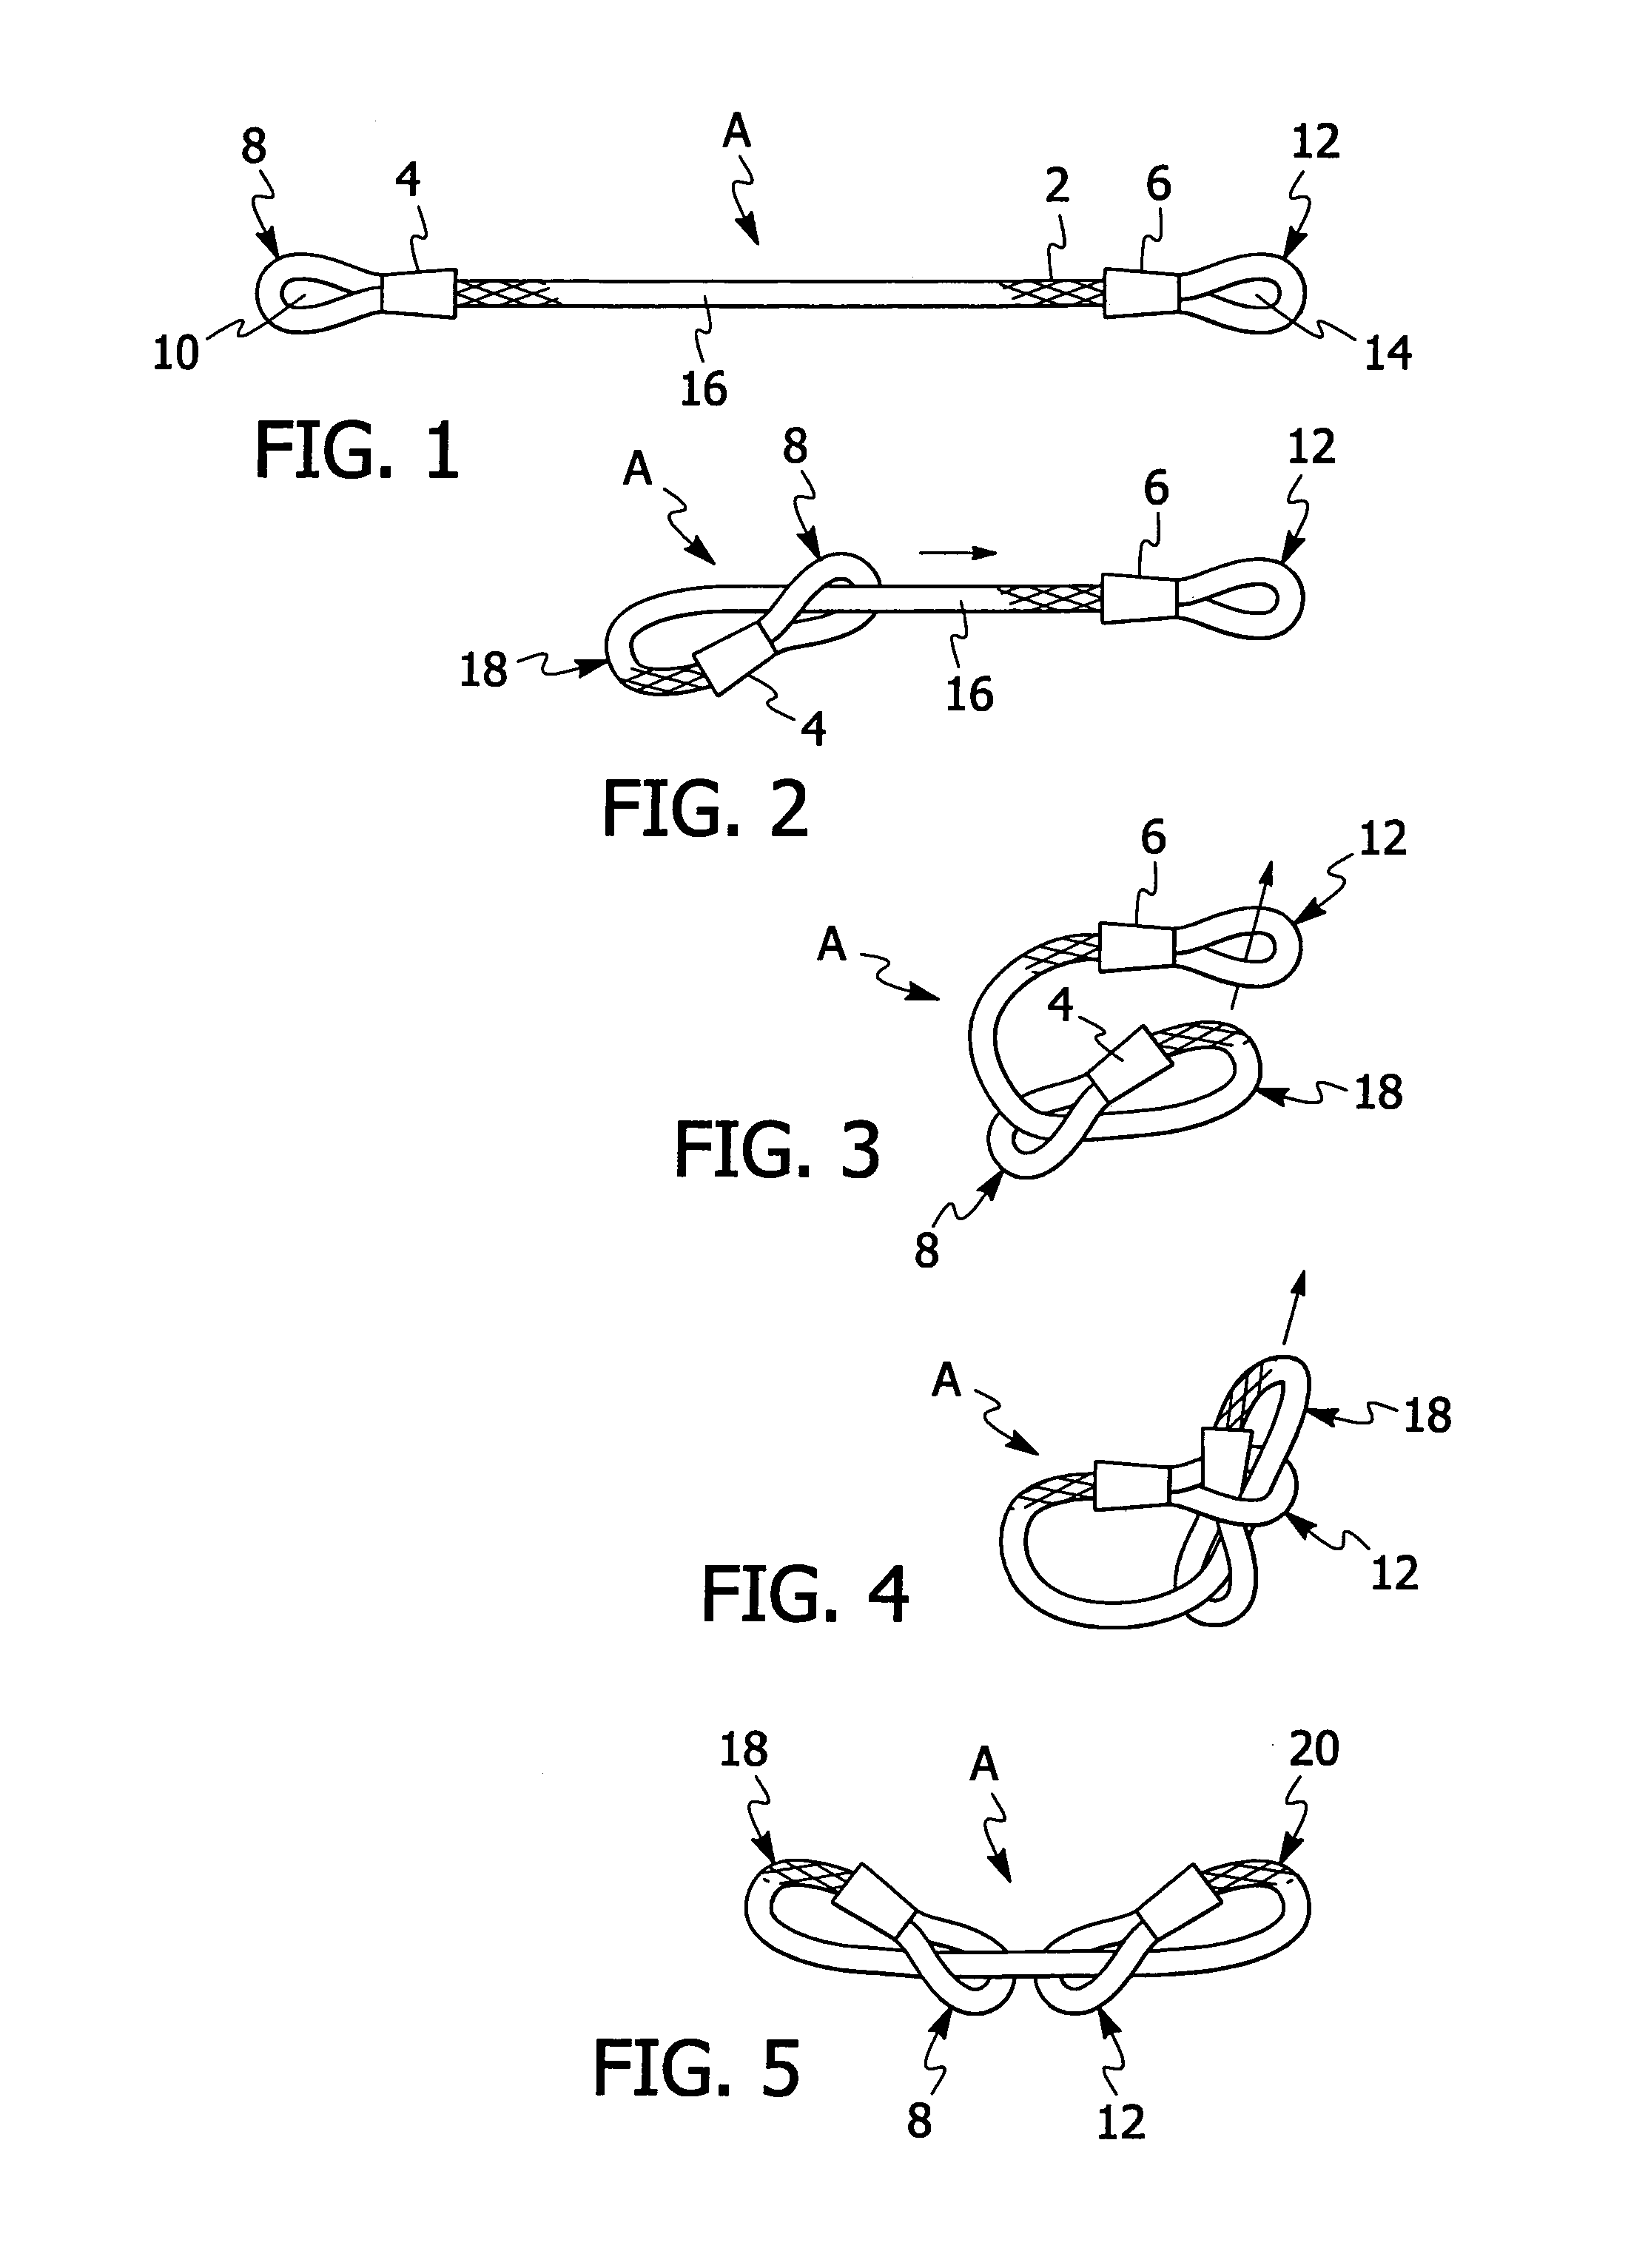 Apparatus and method securely connecting mating ends of multiple power cords